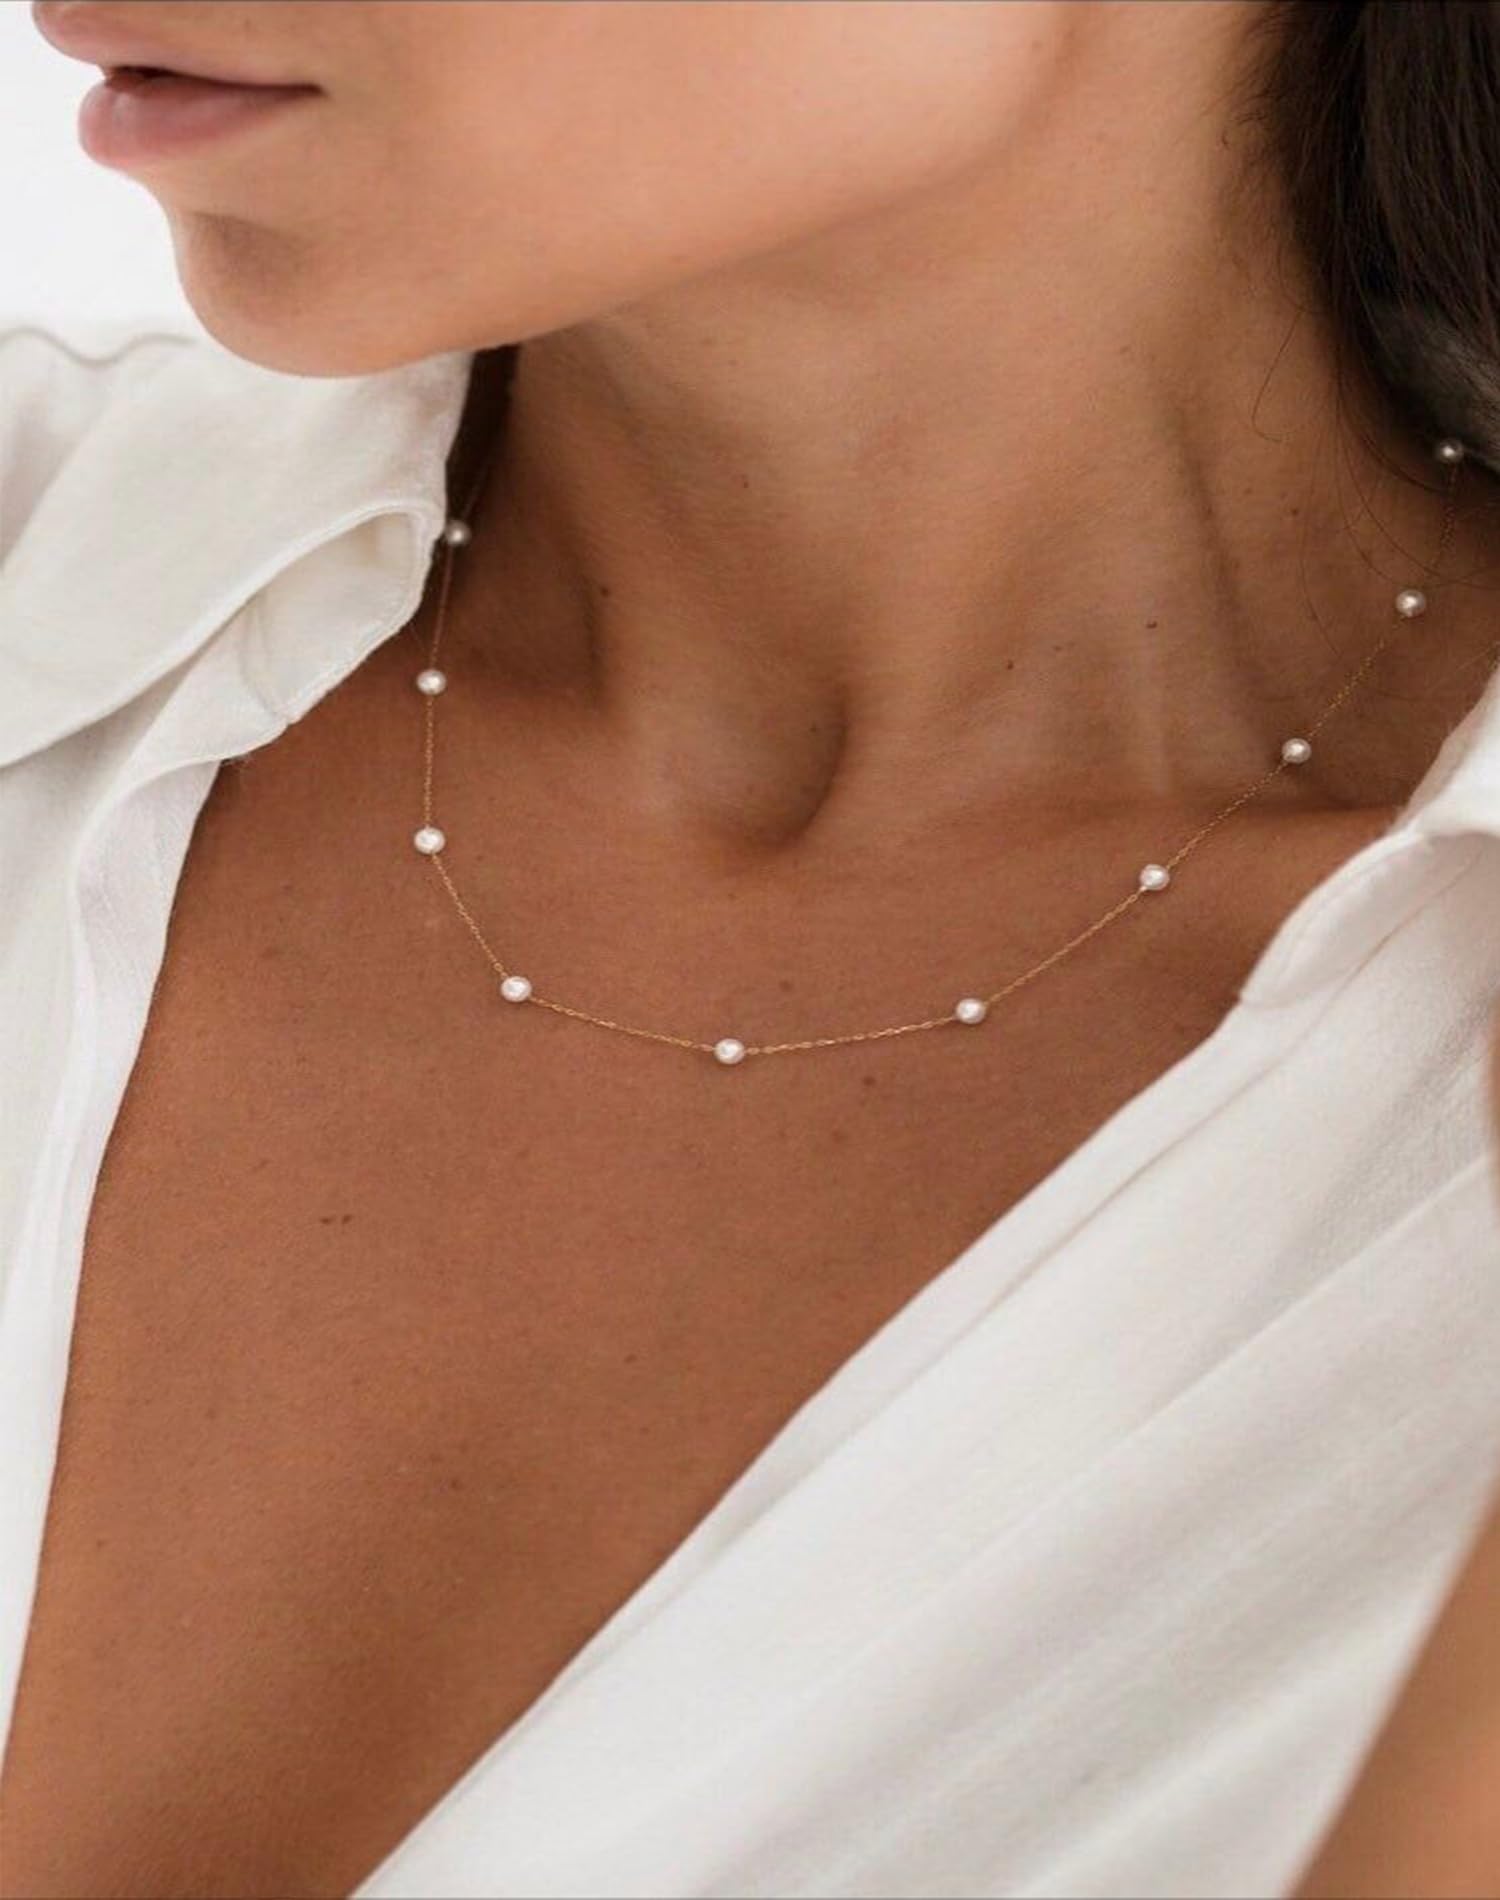 TOSGMY Pearl Necklaces For Women,14K Gold Plated Pearl Choker Dainty Gold Necklace Handmade Faux Pearl Necklace Trendy Pearls Necklace For Women Girls Simple Wedding Prom Bridal Pearls Jewelry